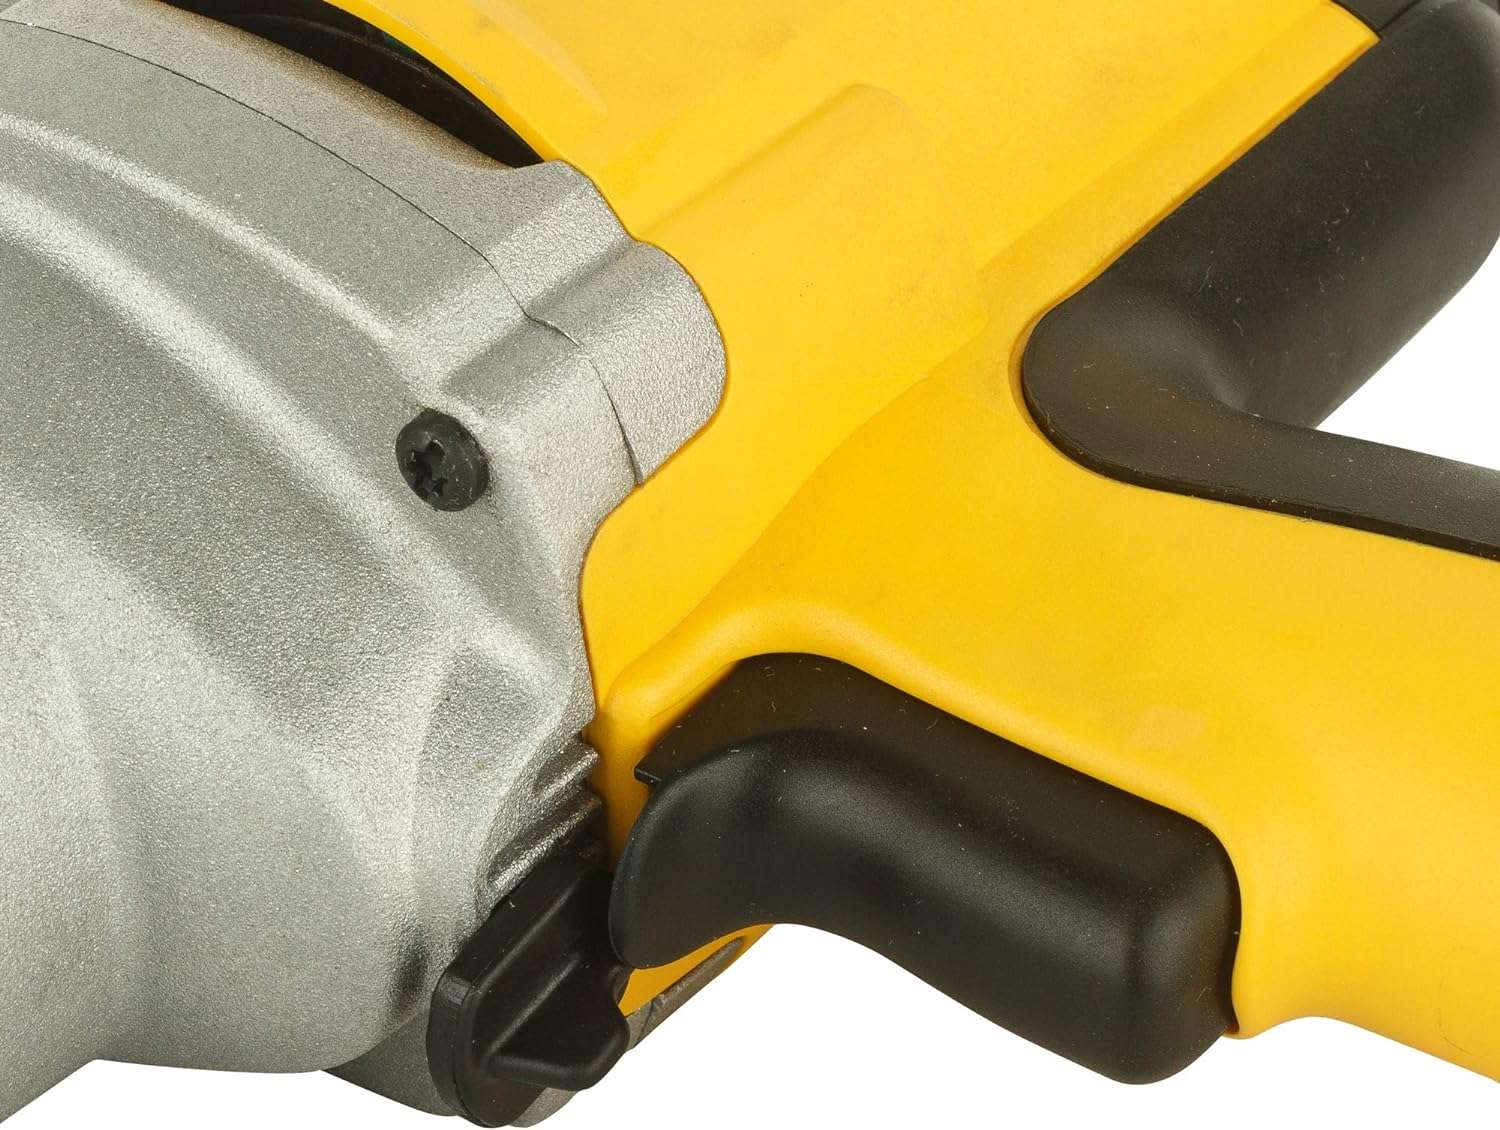 DeWalt DW292 impact wrench with 1/2" connection